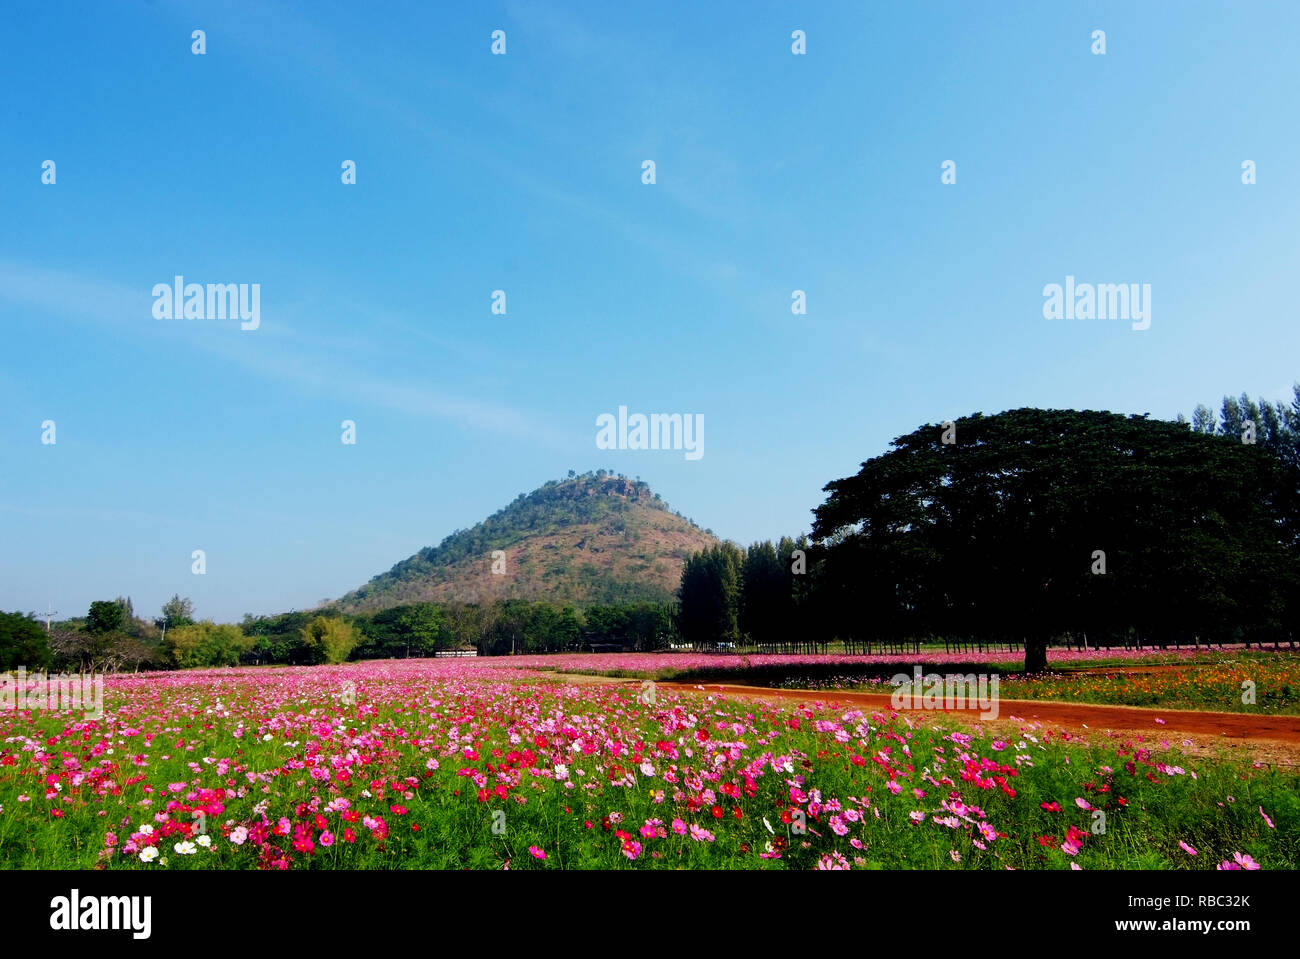 A landscape view of cosmos flower field (farm) Stock Photo